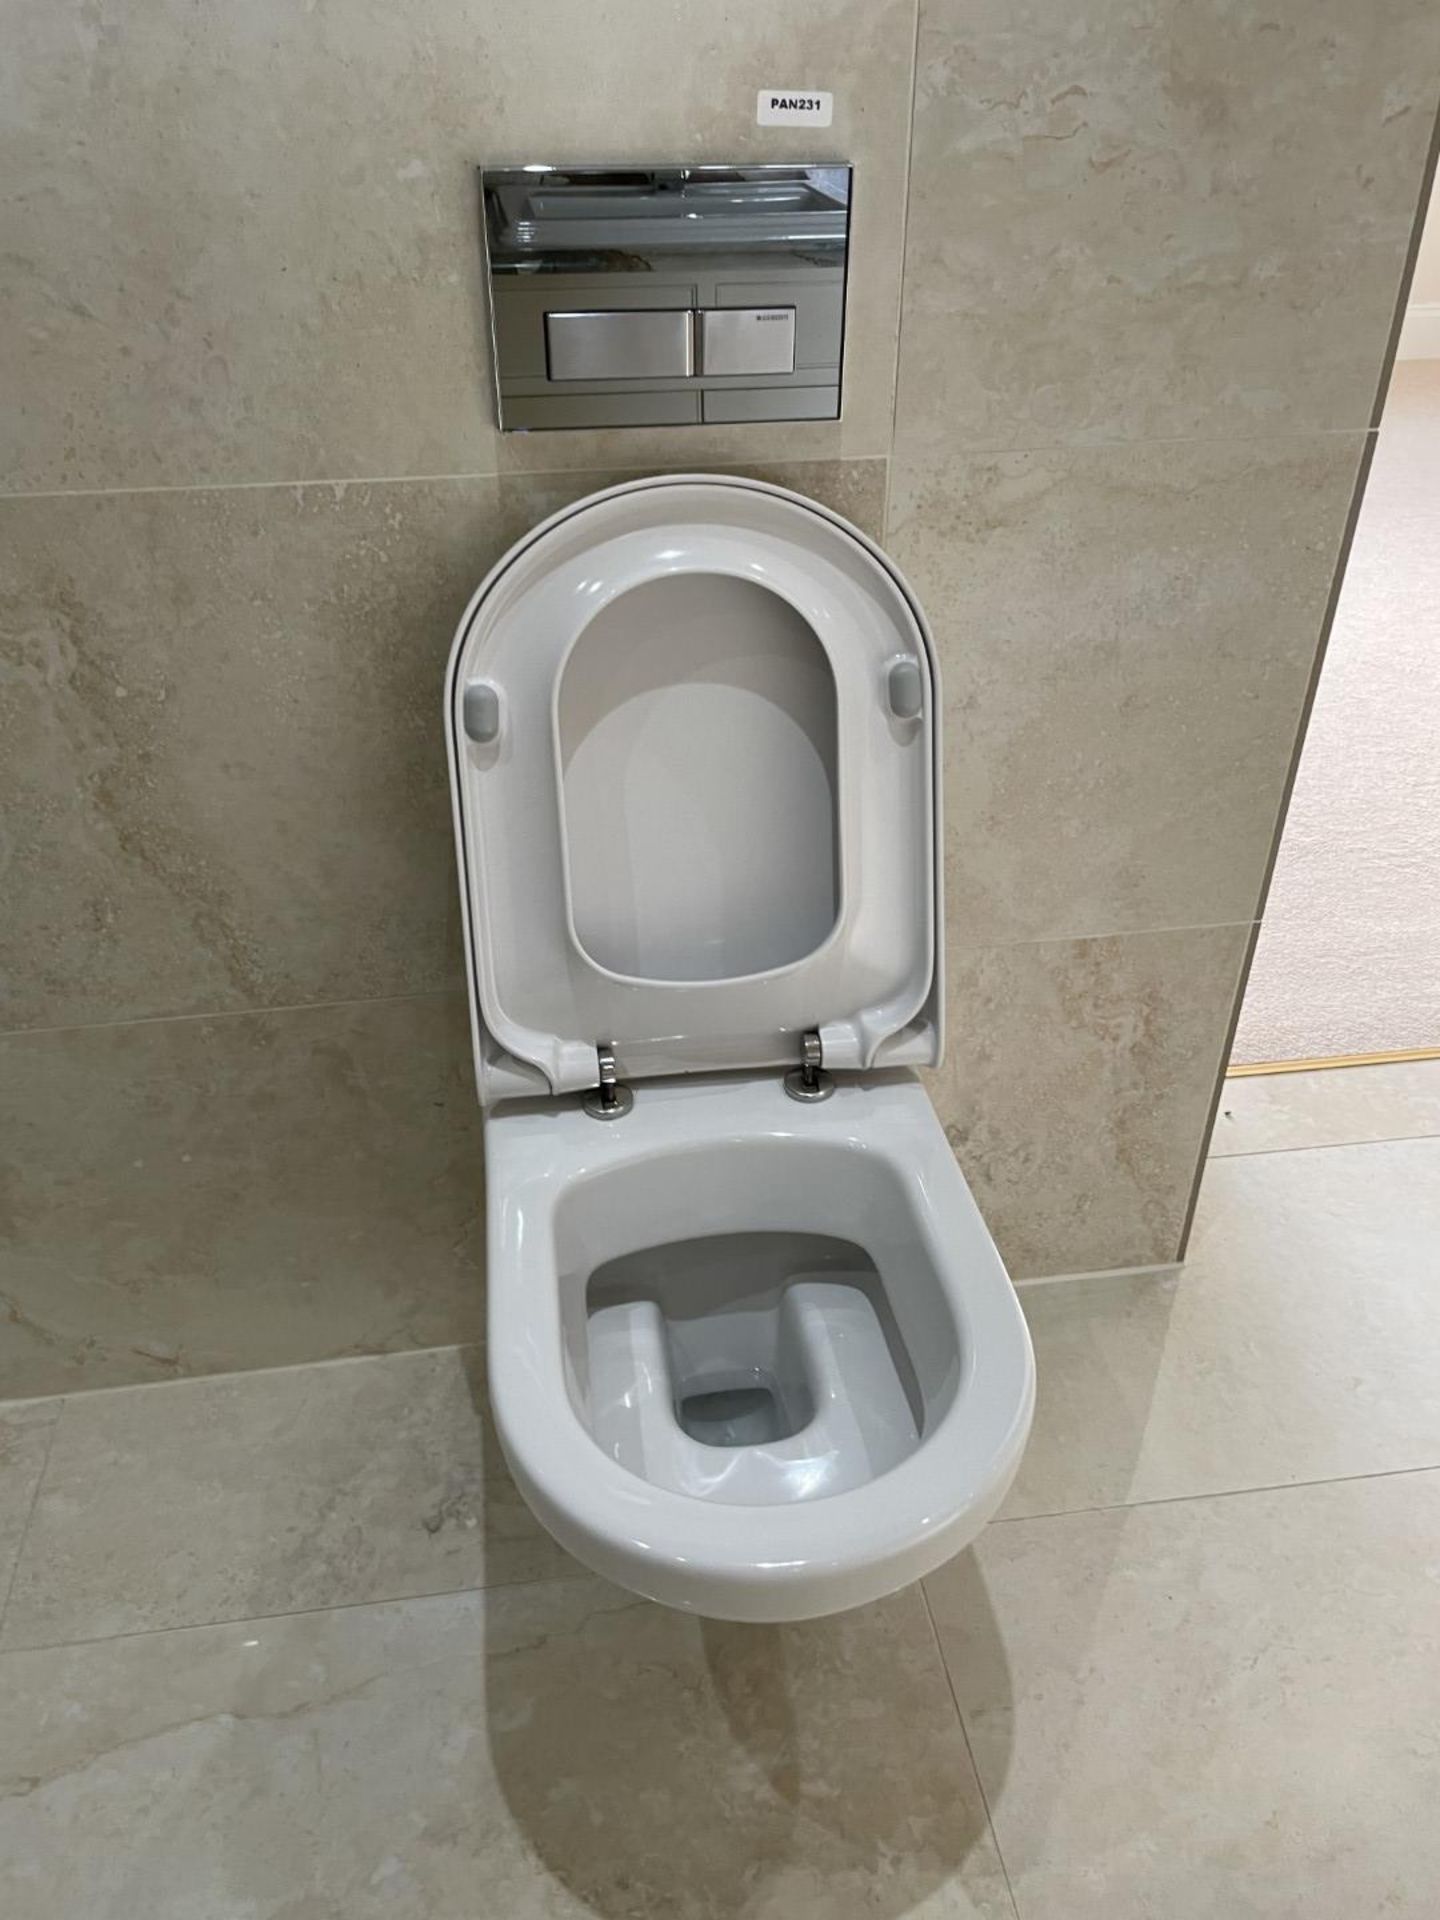 1 x VILLEROY & BOCH Wall Hung Toilet with Geberit Flush Plate - Ref: PAN231 - CL896 - NO VAT ON - Image 6 of 14